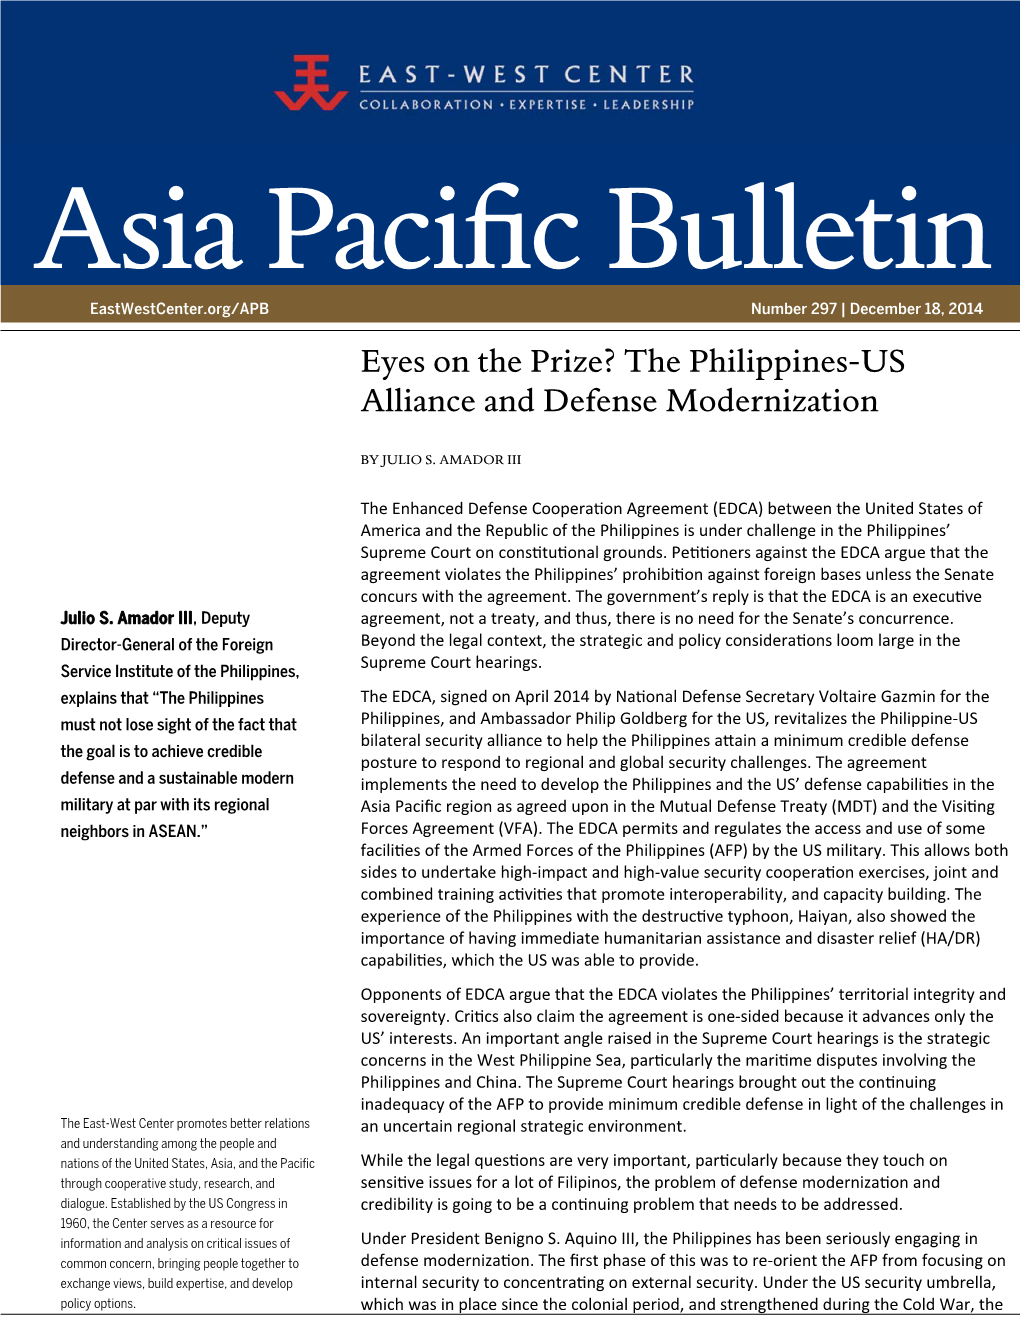 The Philippines-US Alliance and Defense Modernization